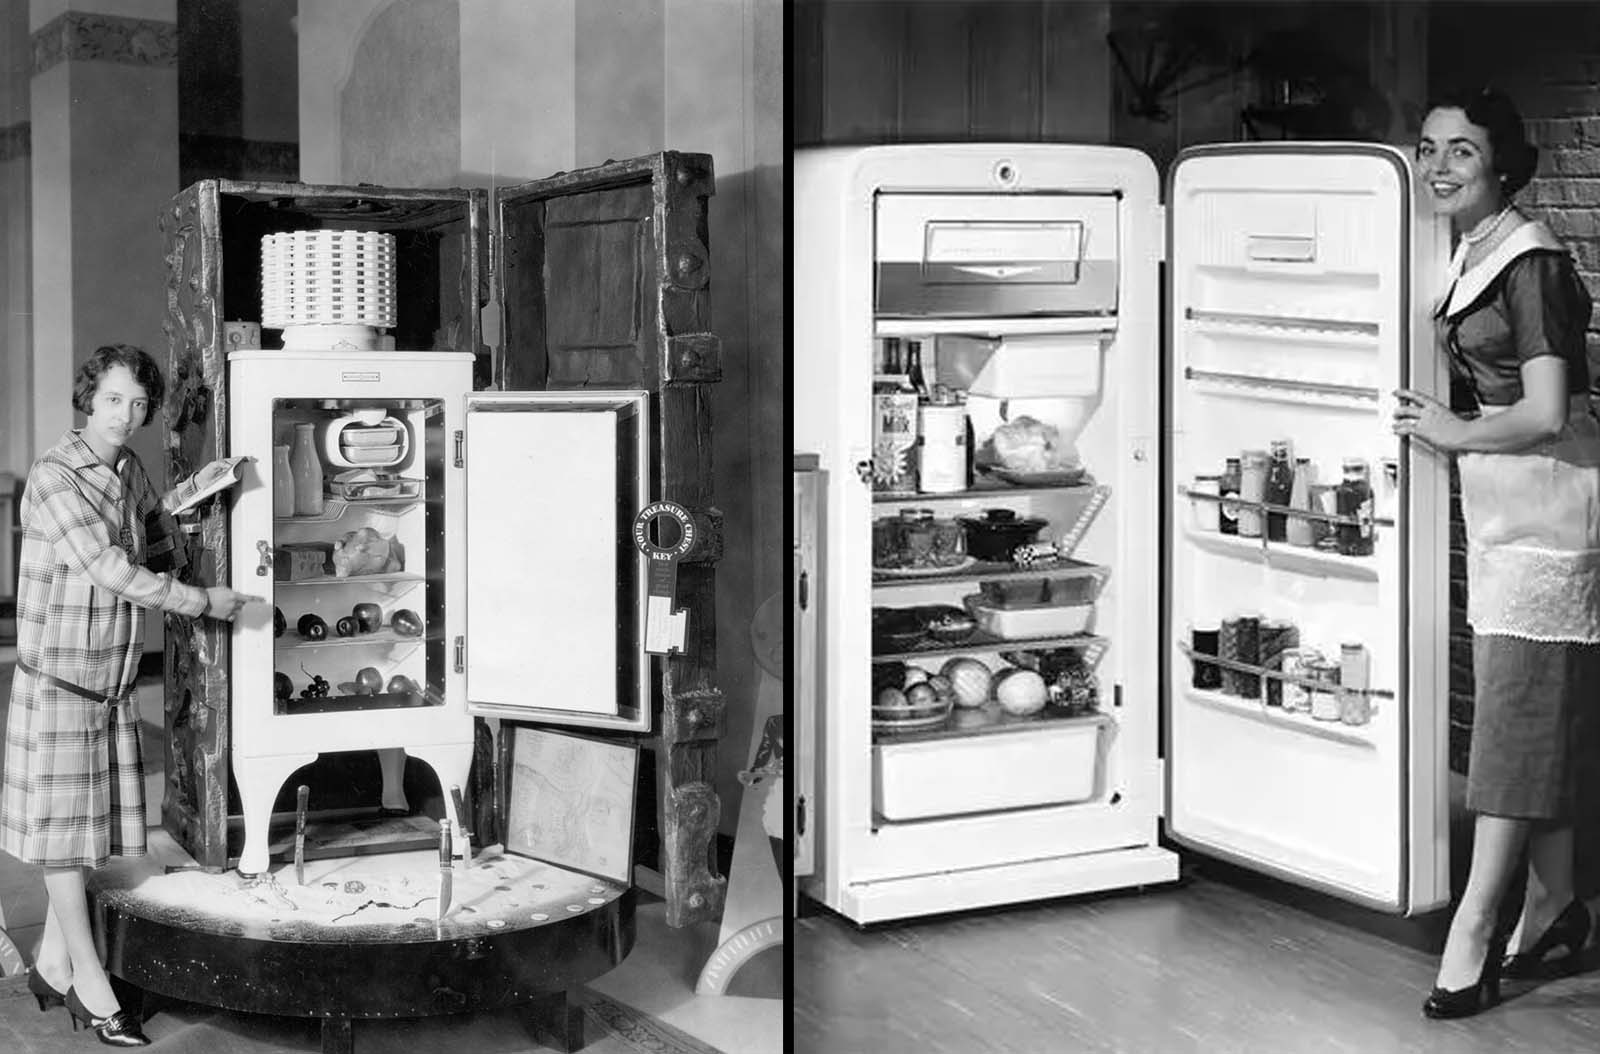 Refrigerators of the Past: A Fascinating Look at Vintage Refrigerator Ads and Photos from the 1920s to 1950s